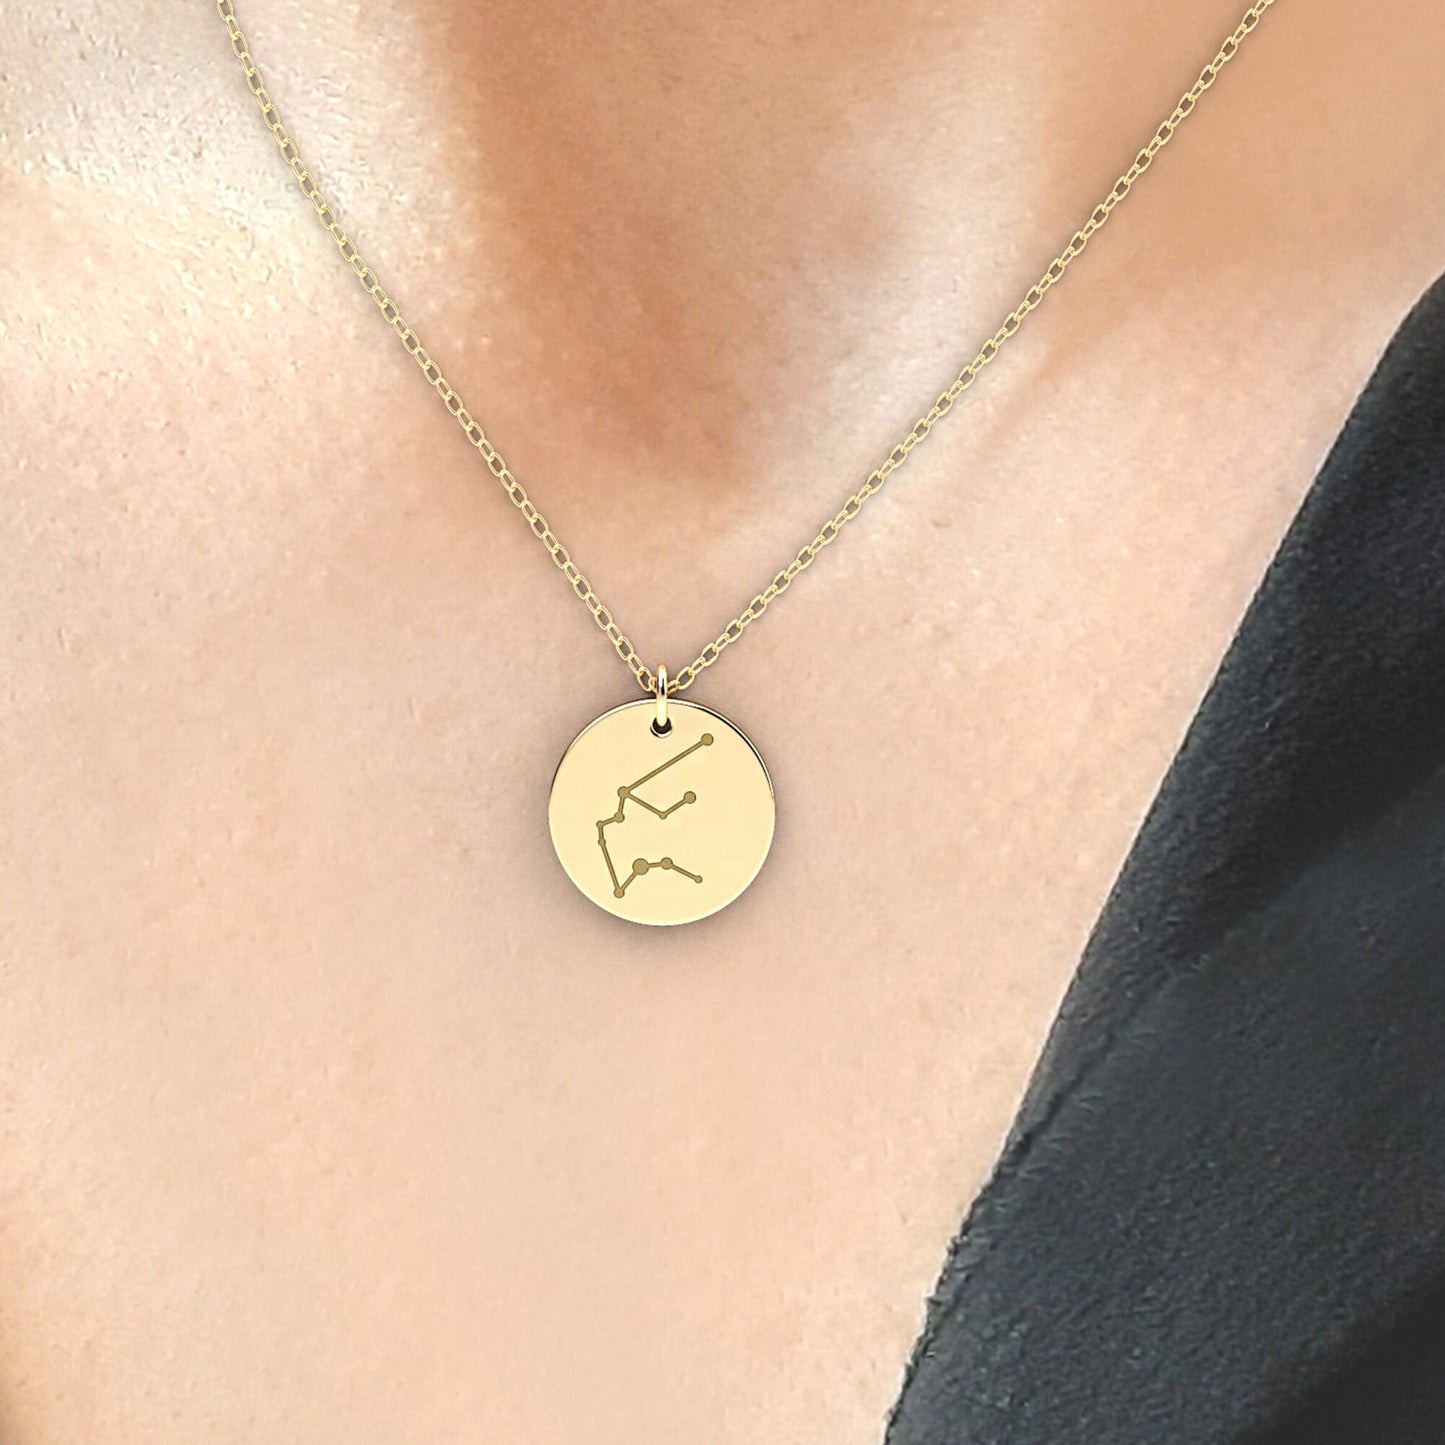 Star Signet Necklace • Custom Zodiac Necklace • Constellation Necklace • Real 14k solid gold •  Birthday Gift for Her • Best Friend Gift